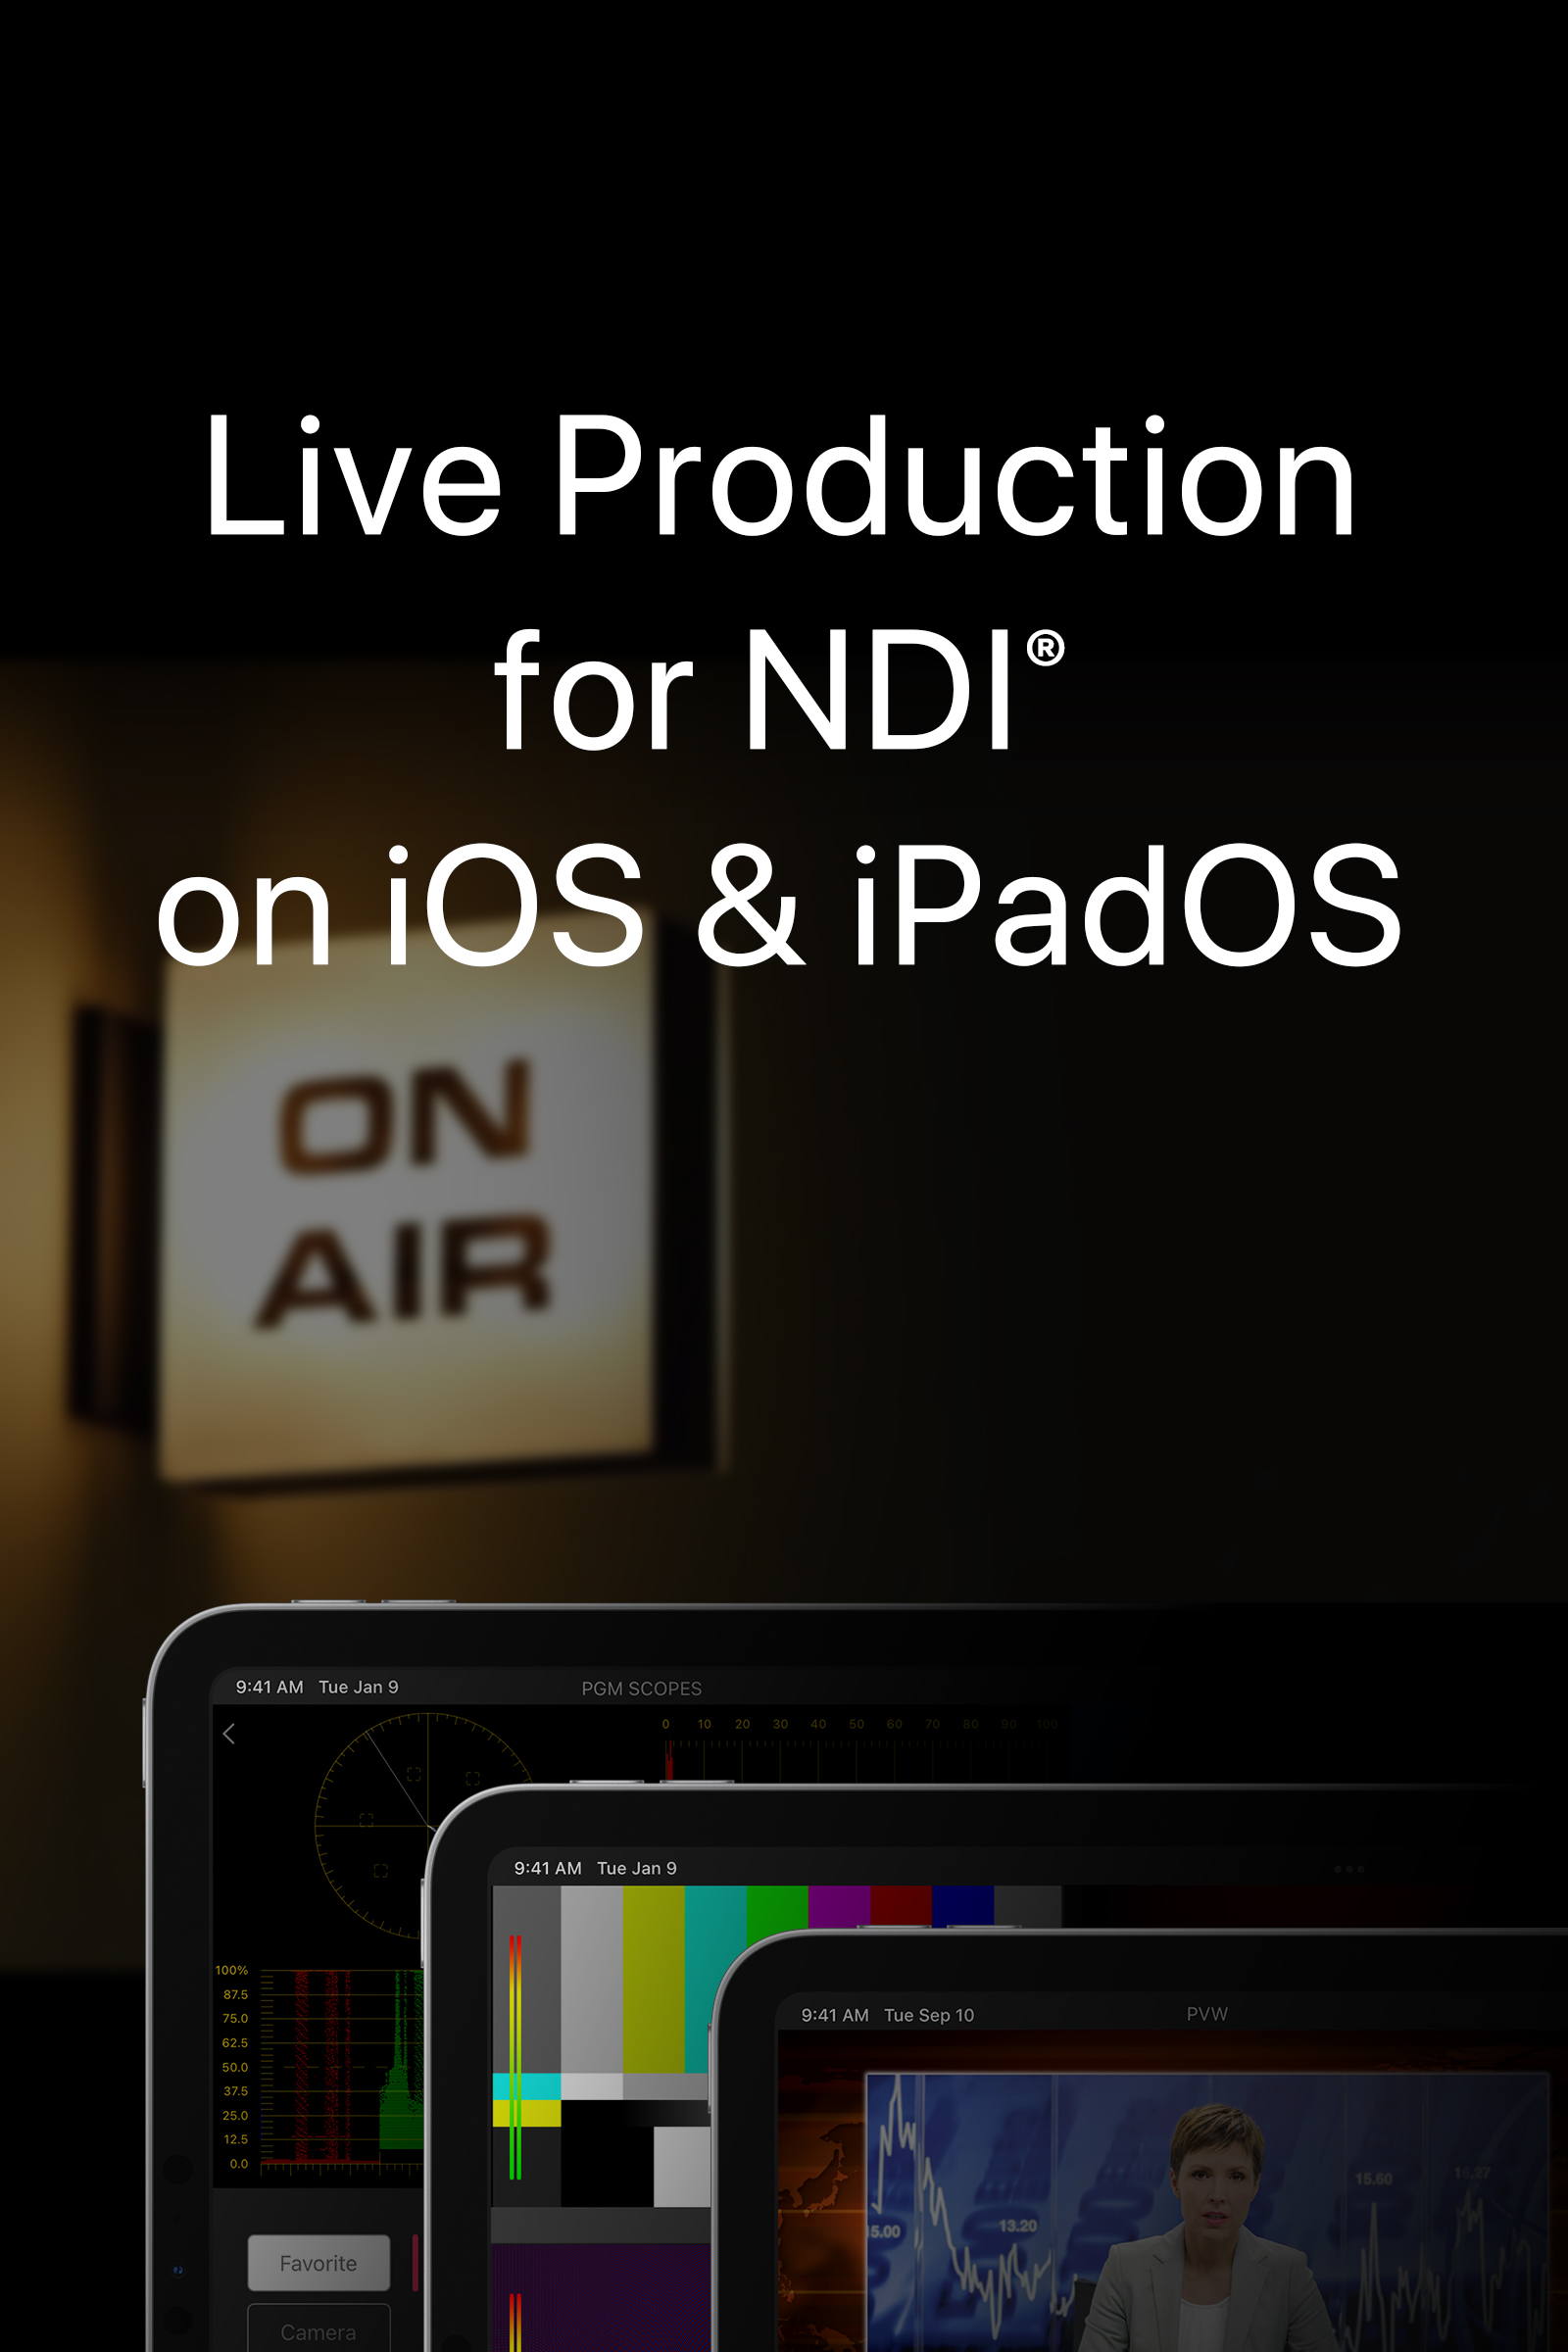 TopDirector, Live Production for NDI on iOS & iPadOS for MultiCam Switcher and Live Stream